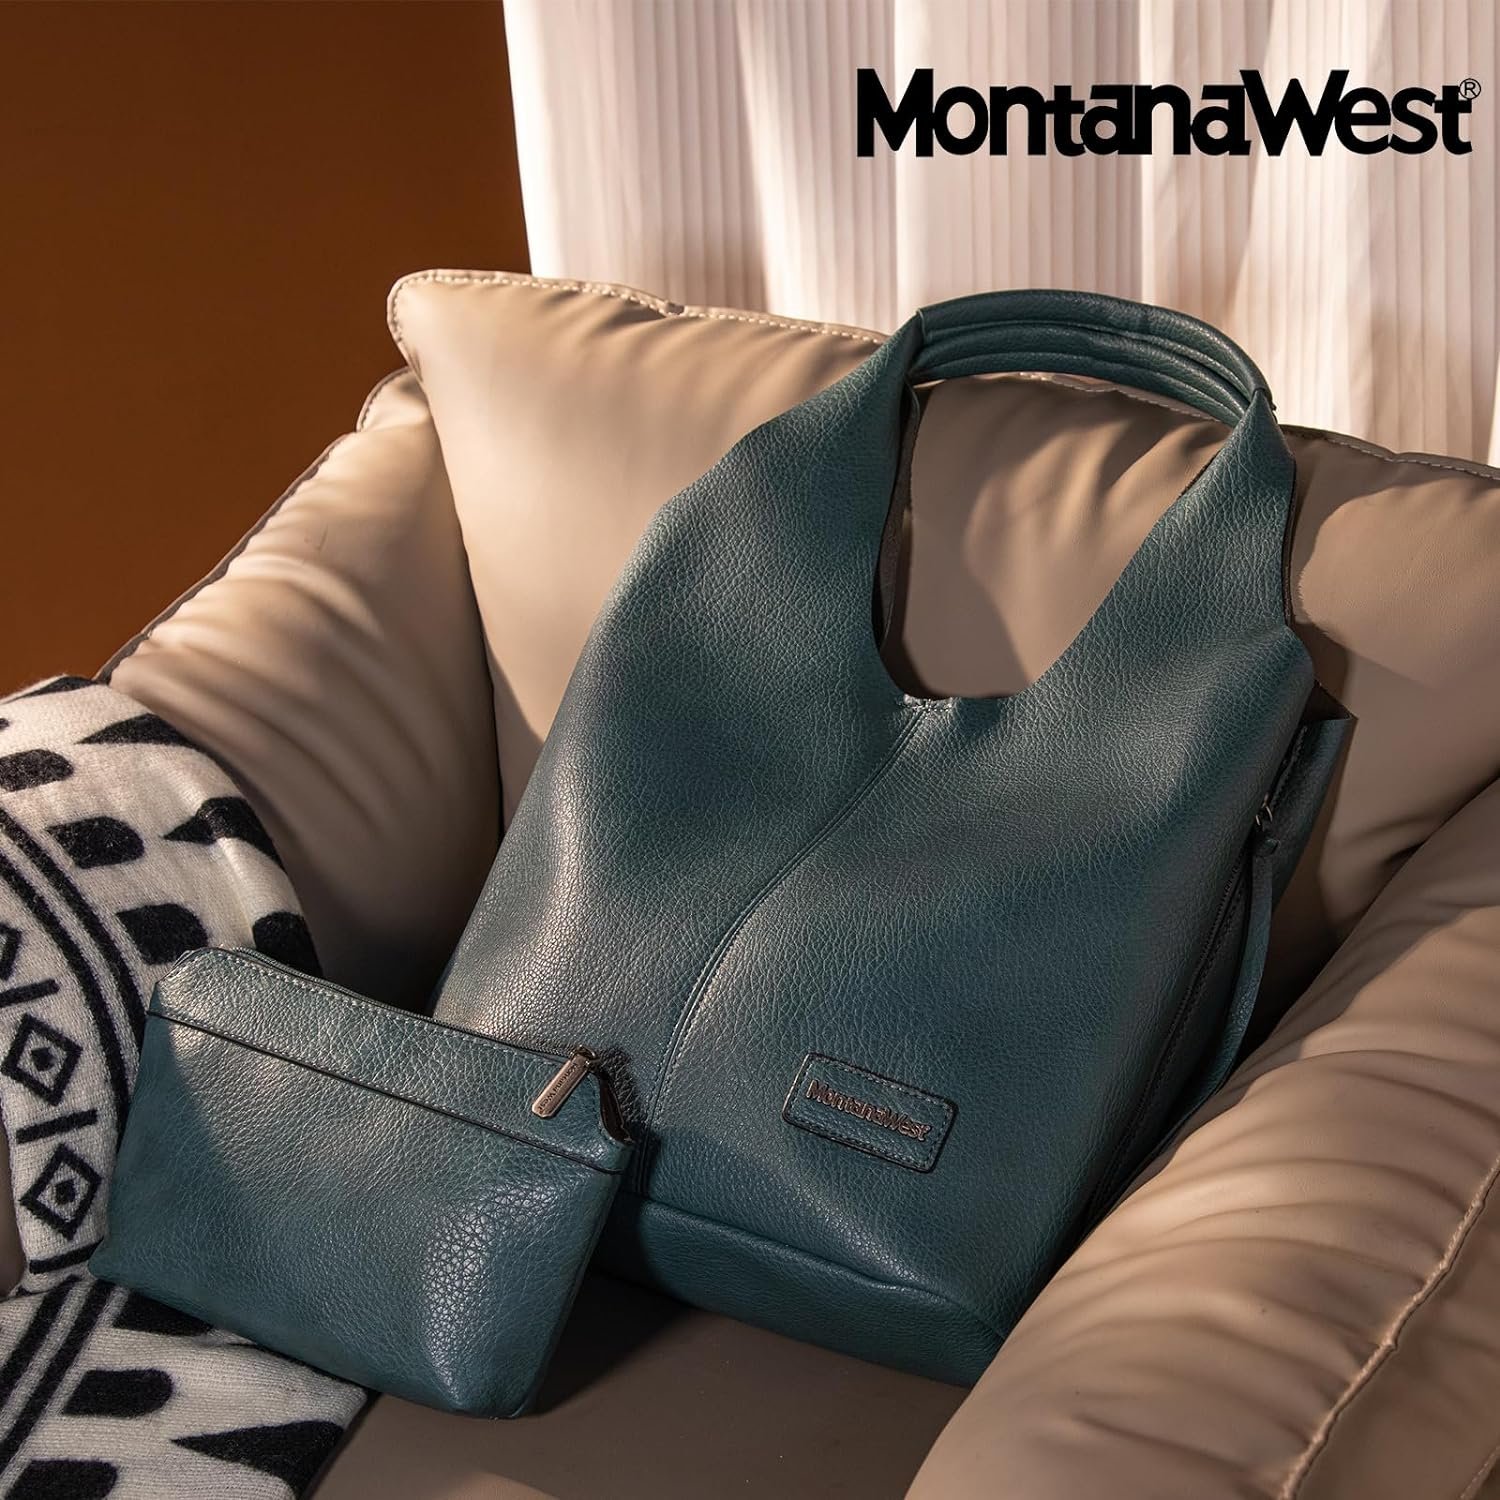 Montana West Hobo Bags Review